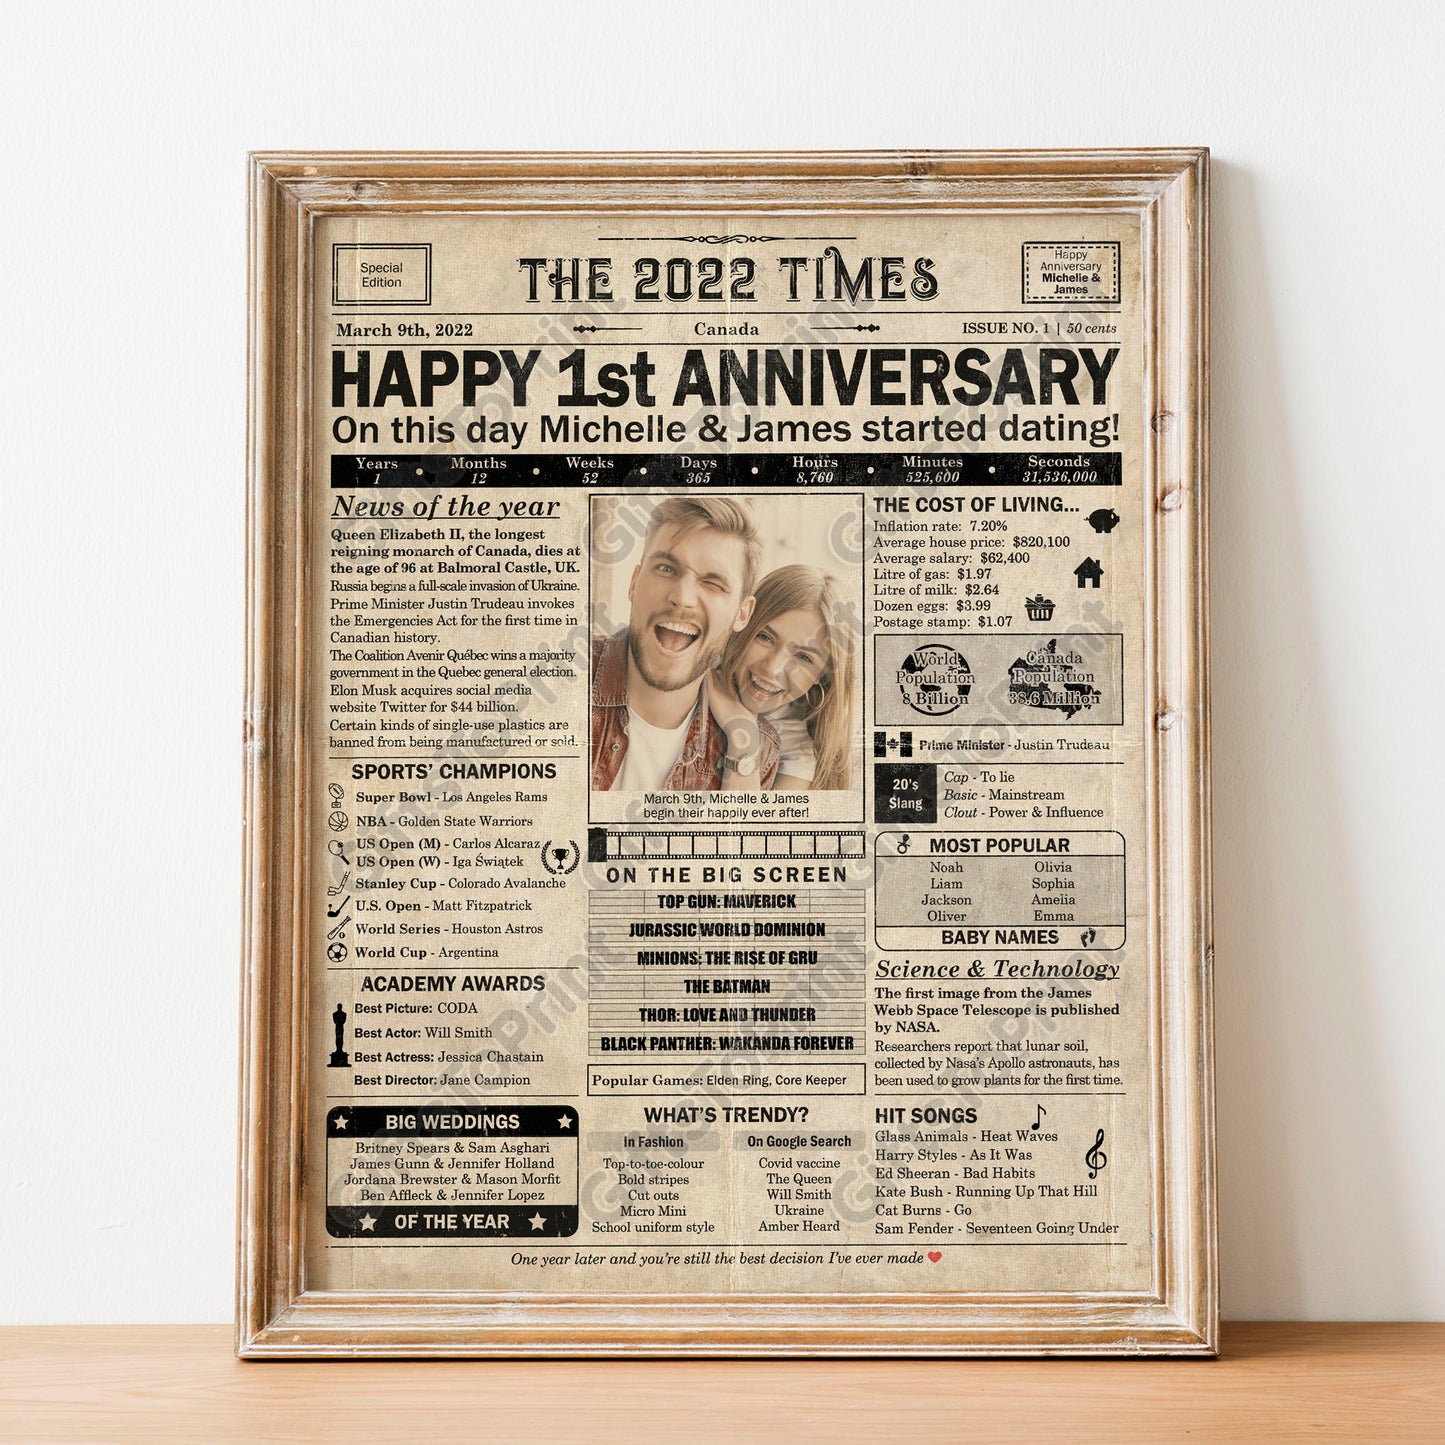 Personalized Dating Anniversary Gift: A Printable CANADIAN Poster - Customized for ANY YEAR